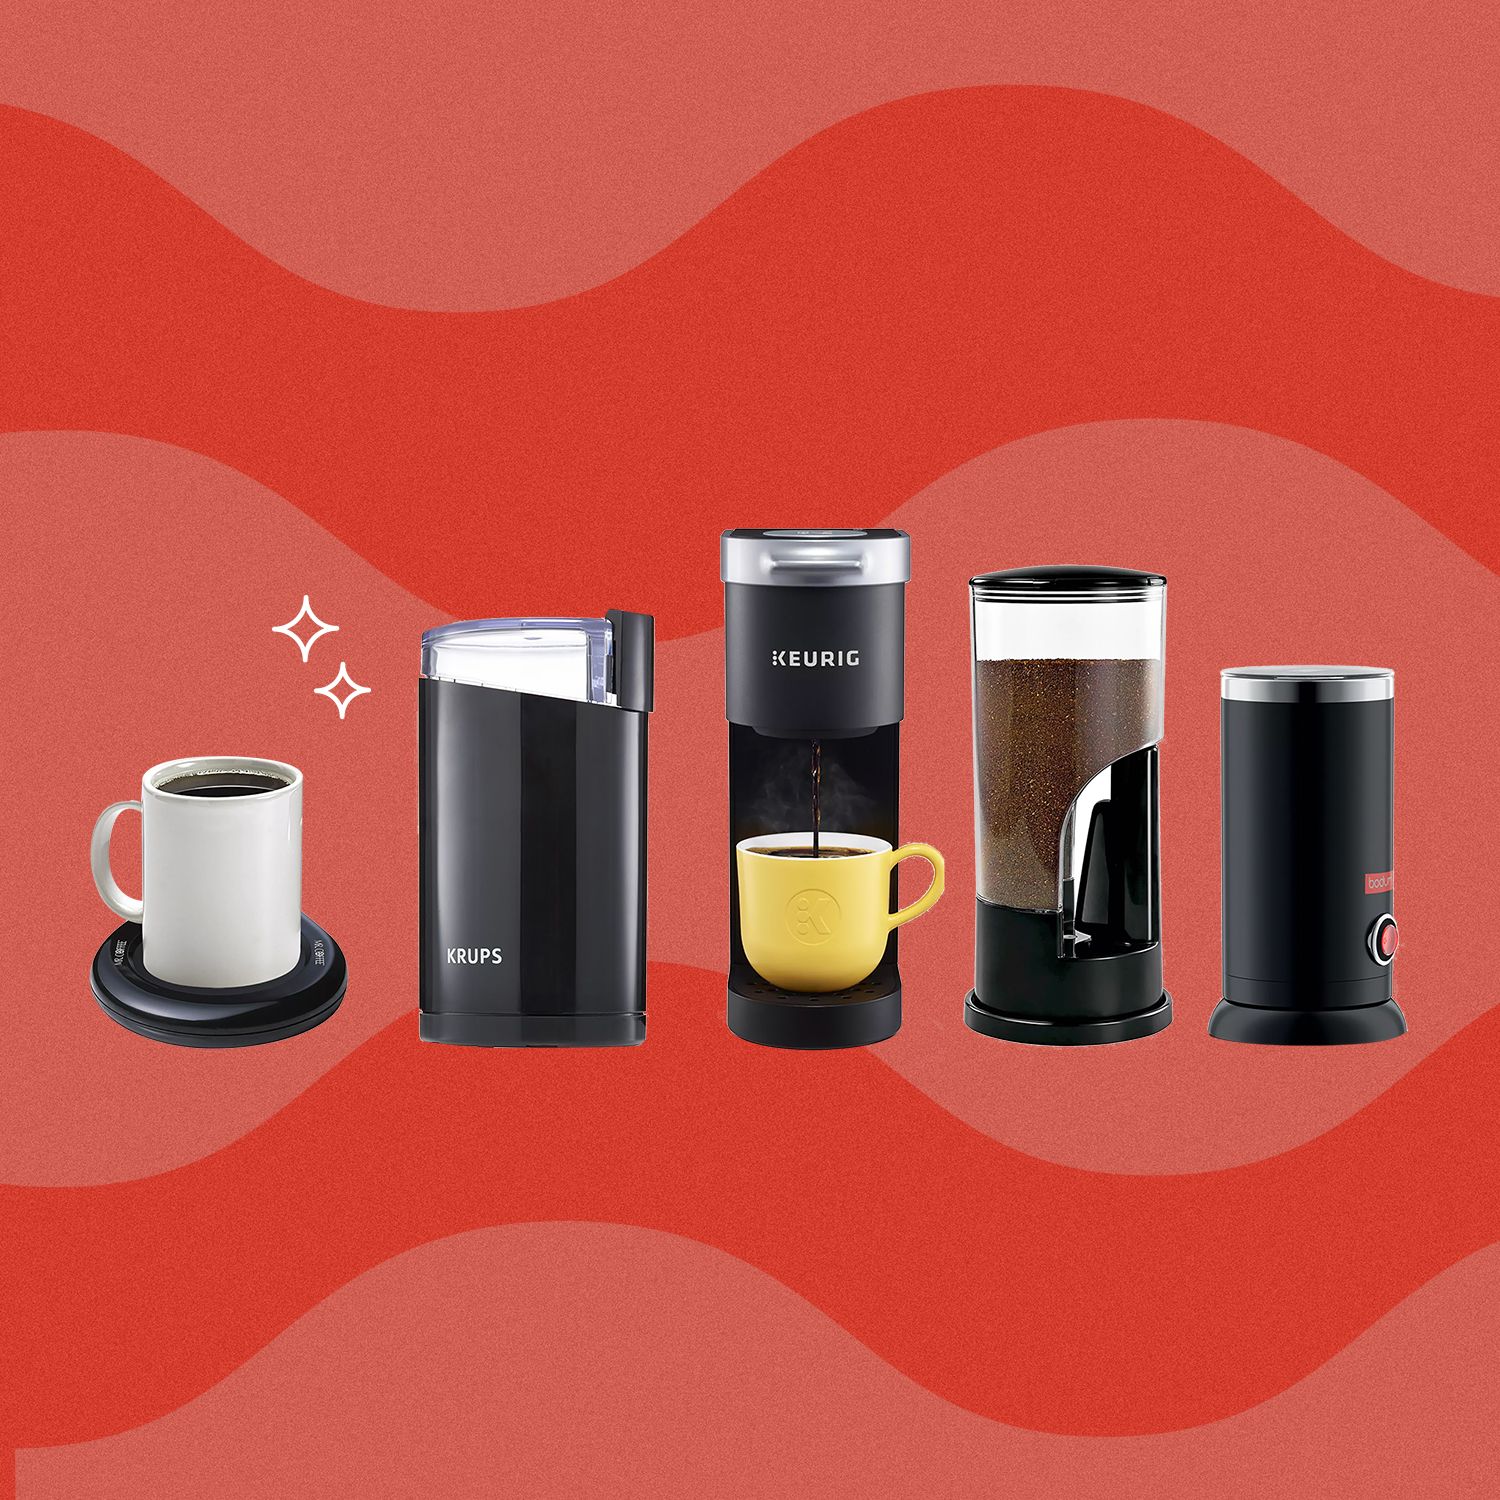 11 Interesting Coffee Accessories and Gadgets For Coffee Lovers